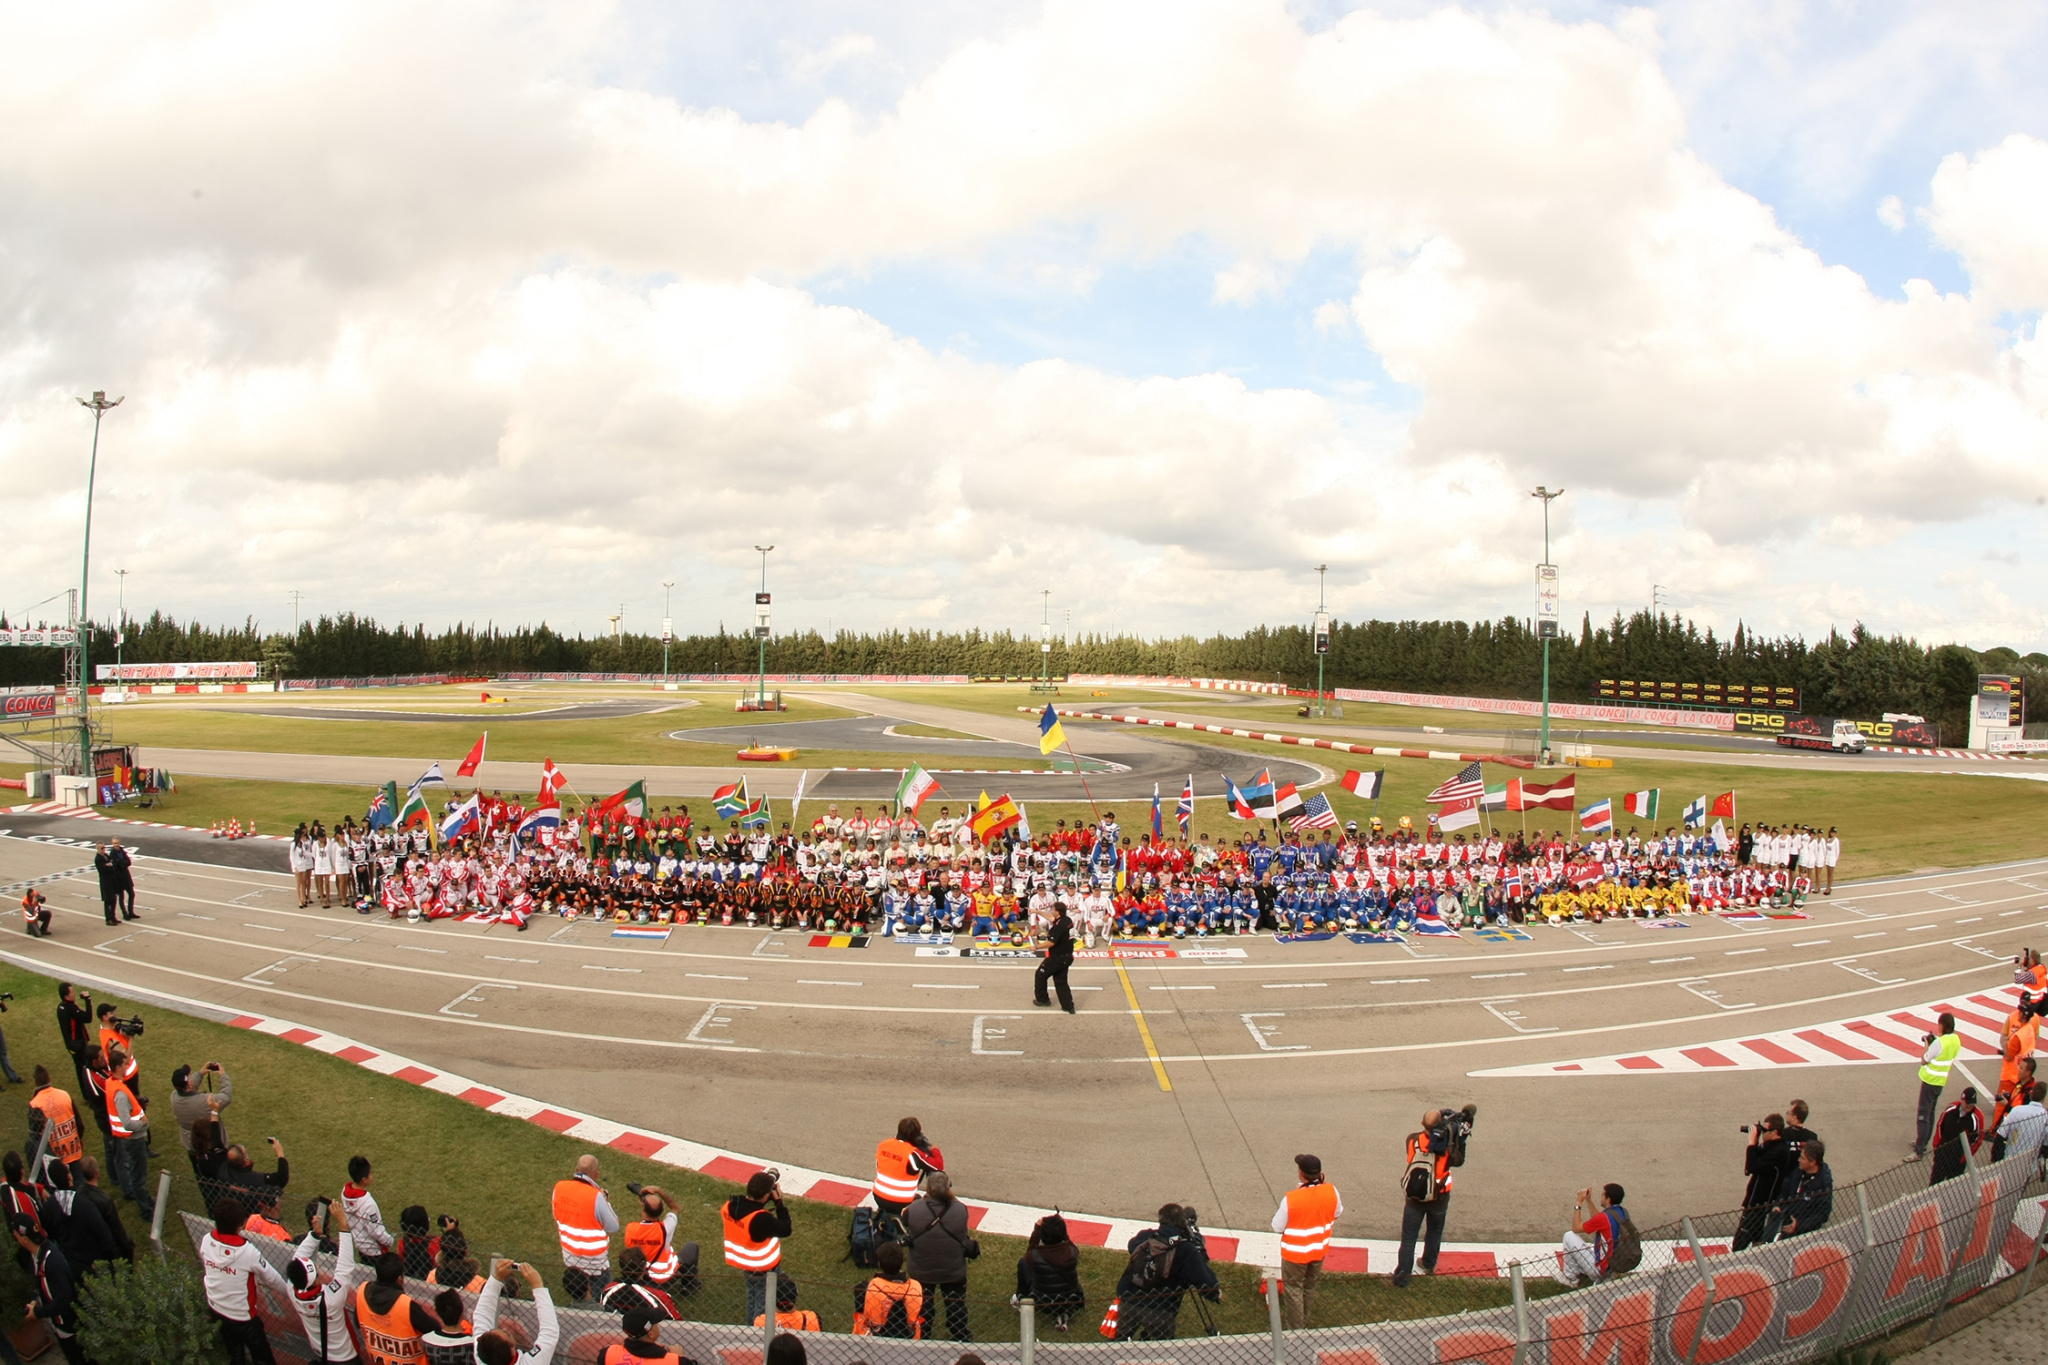 Drivers Picture RMCGF 2010